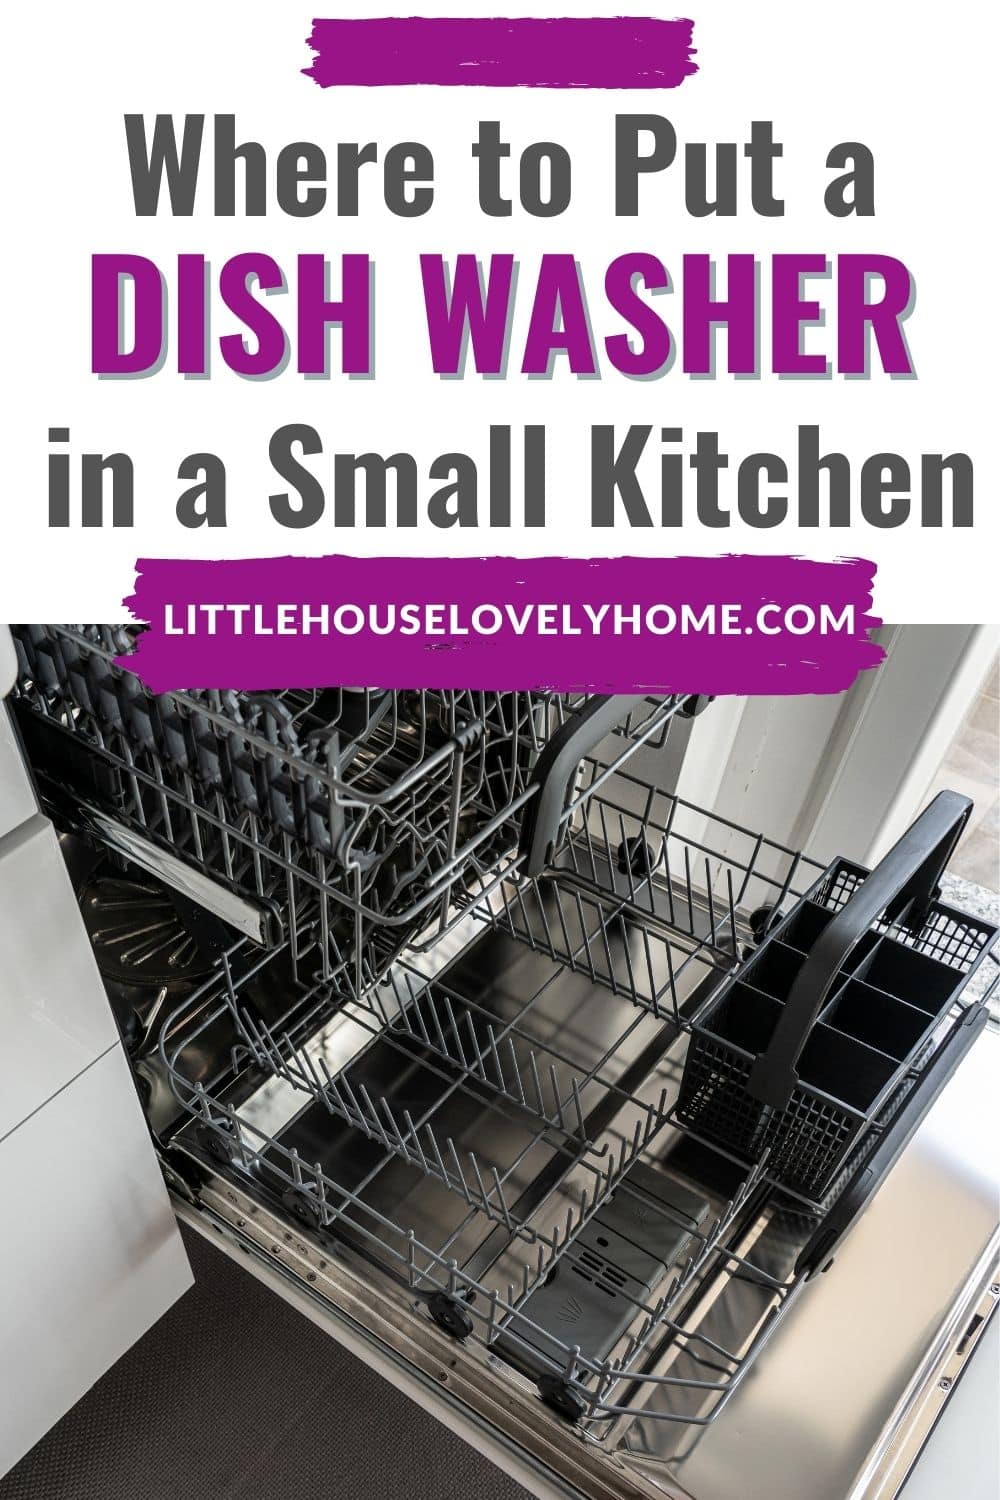 picture of a dishwasher with text overlay that reads 1Where to put a dishwasher in a small kitchen